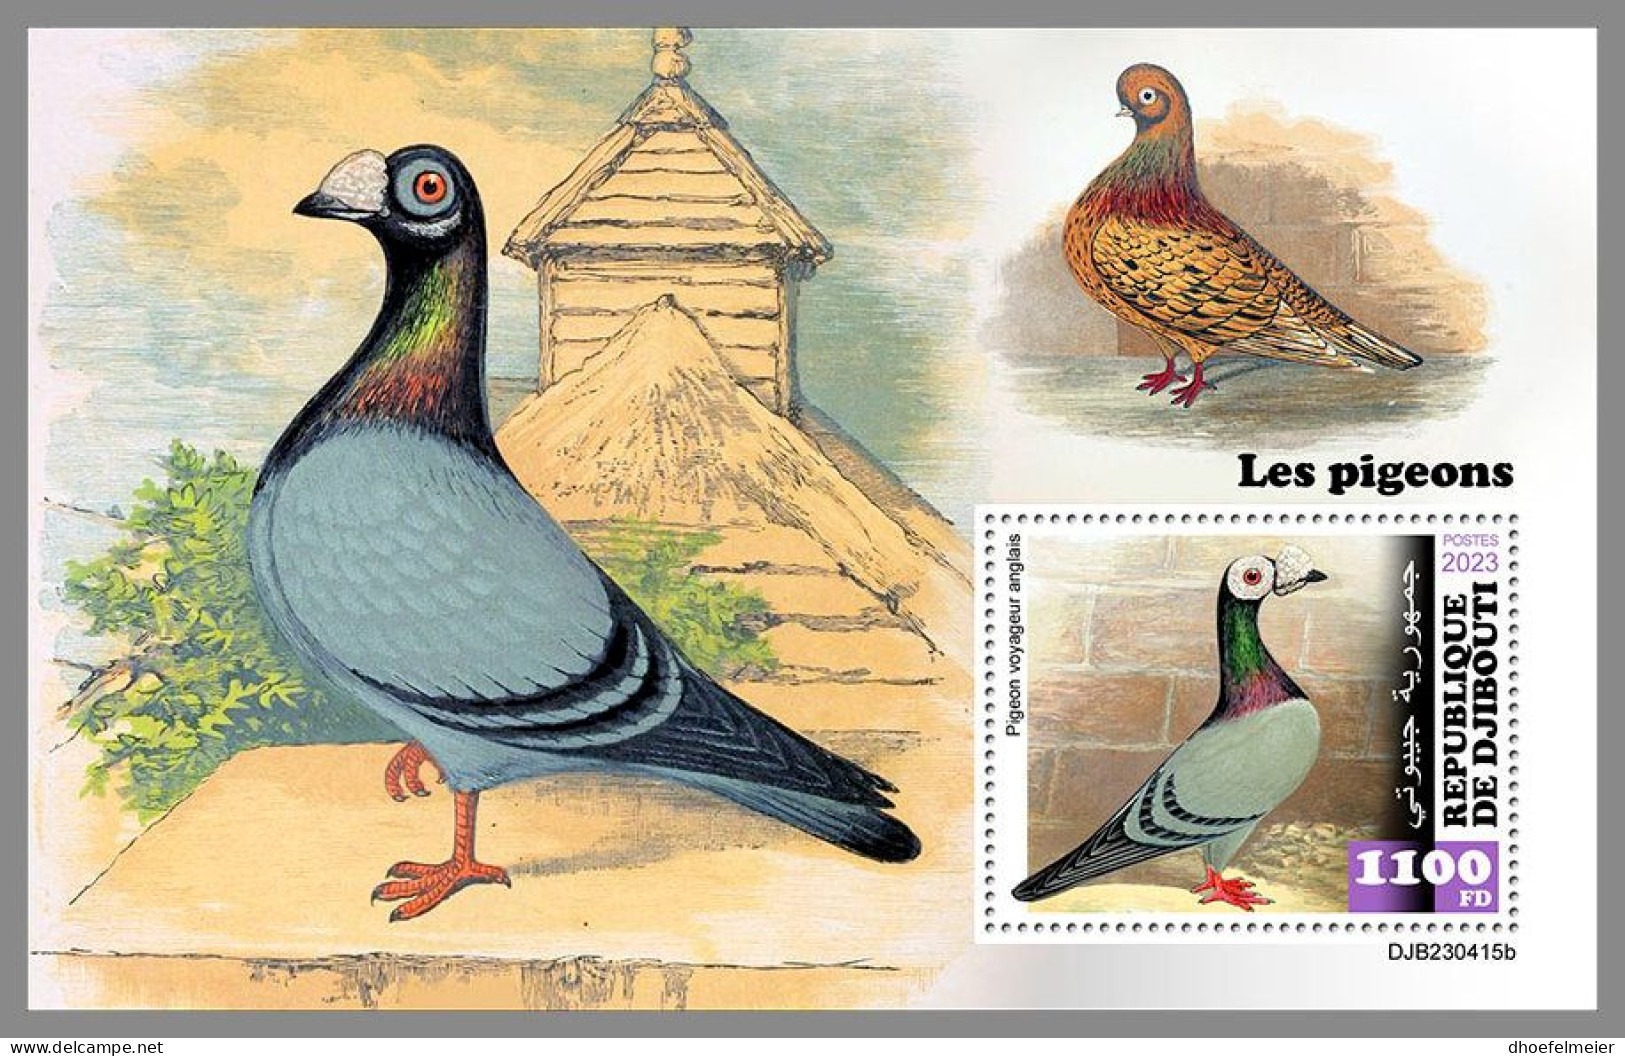 DJIBOUTI 2023 MNH Pigeons Tauben S/S – OFFICIAL ISSUE – DHQ2420 - Columbiformes